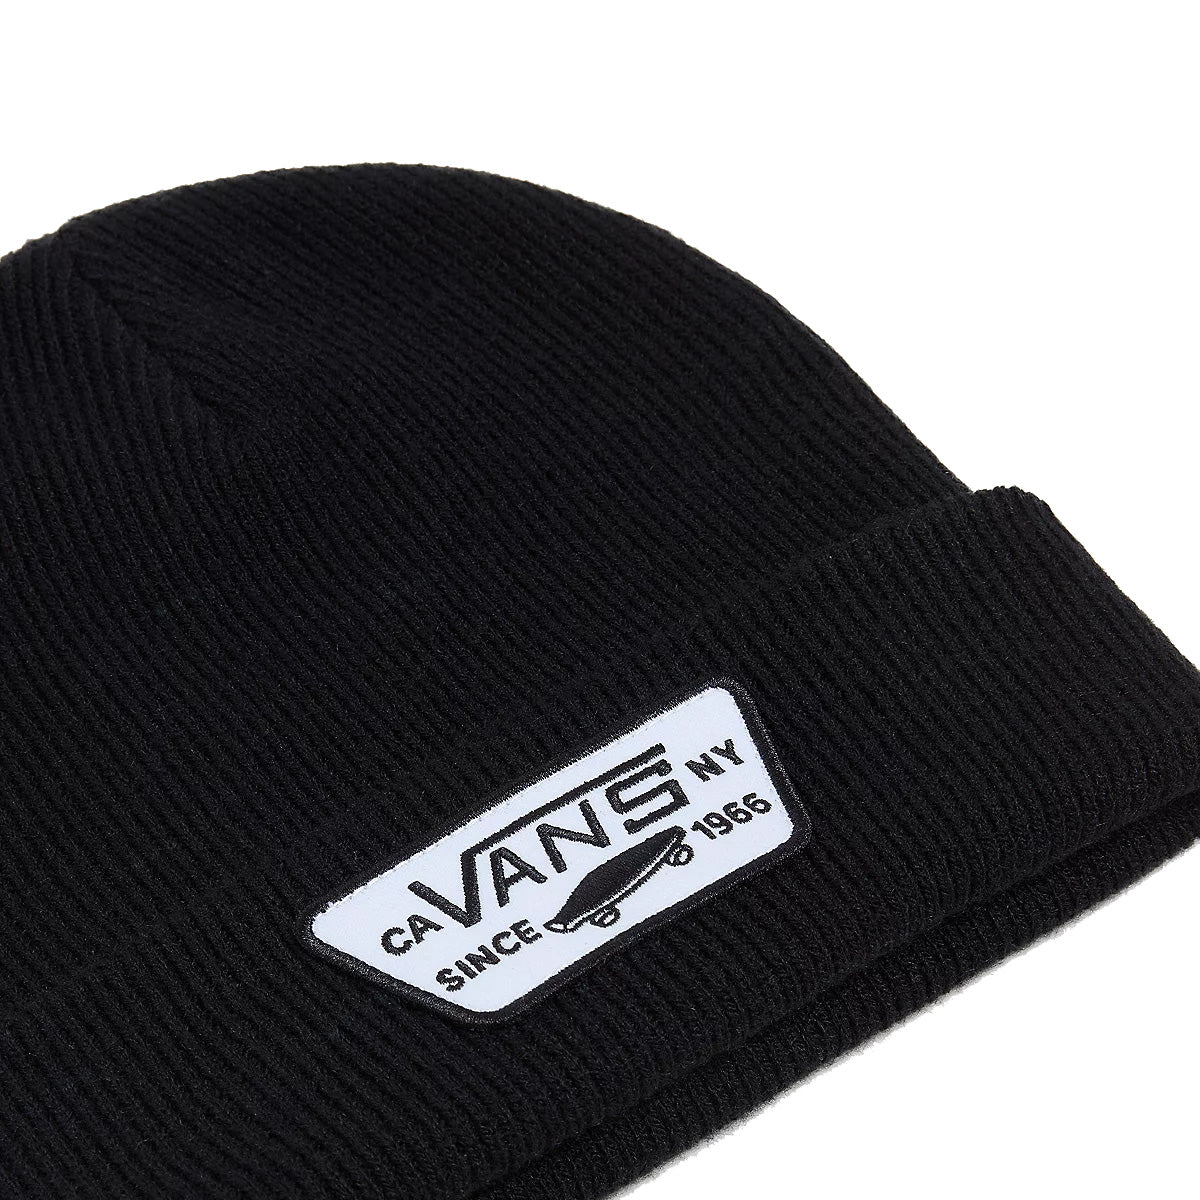 Black vans cuffed and ribbed beanie with black and white vans patch logo on front. Free uk shipping over £50